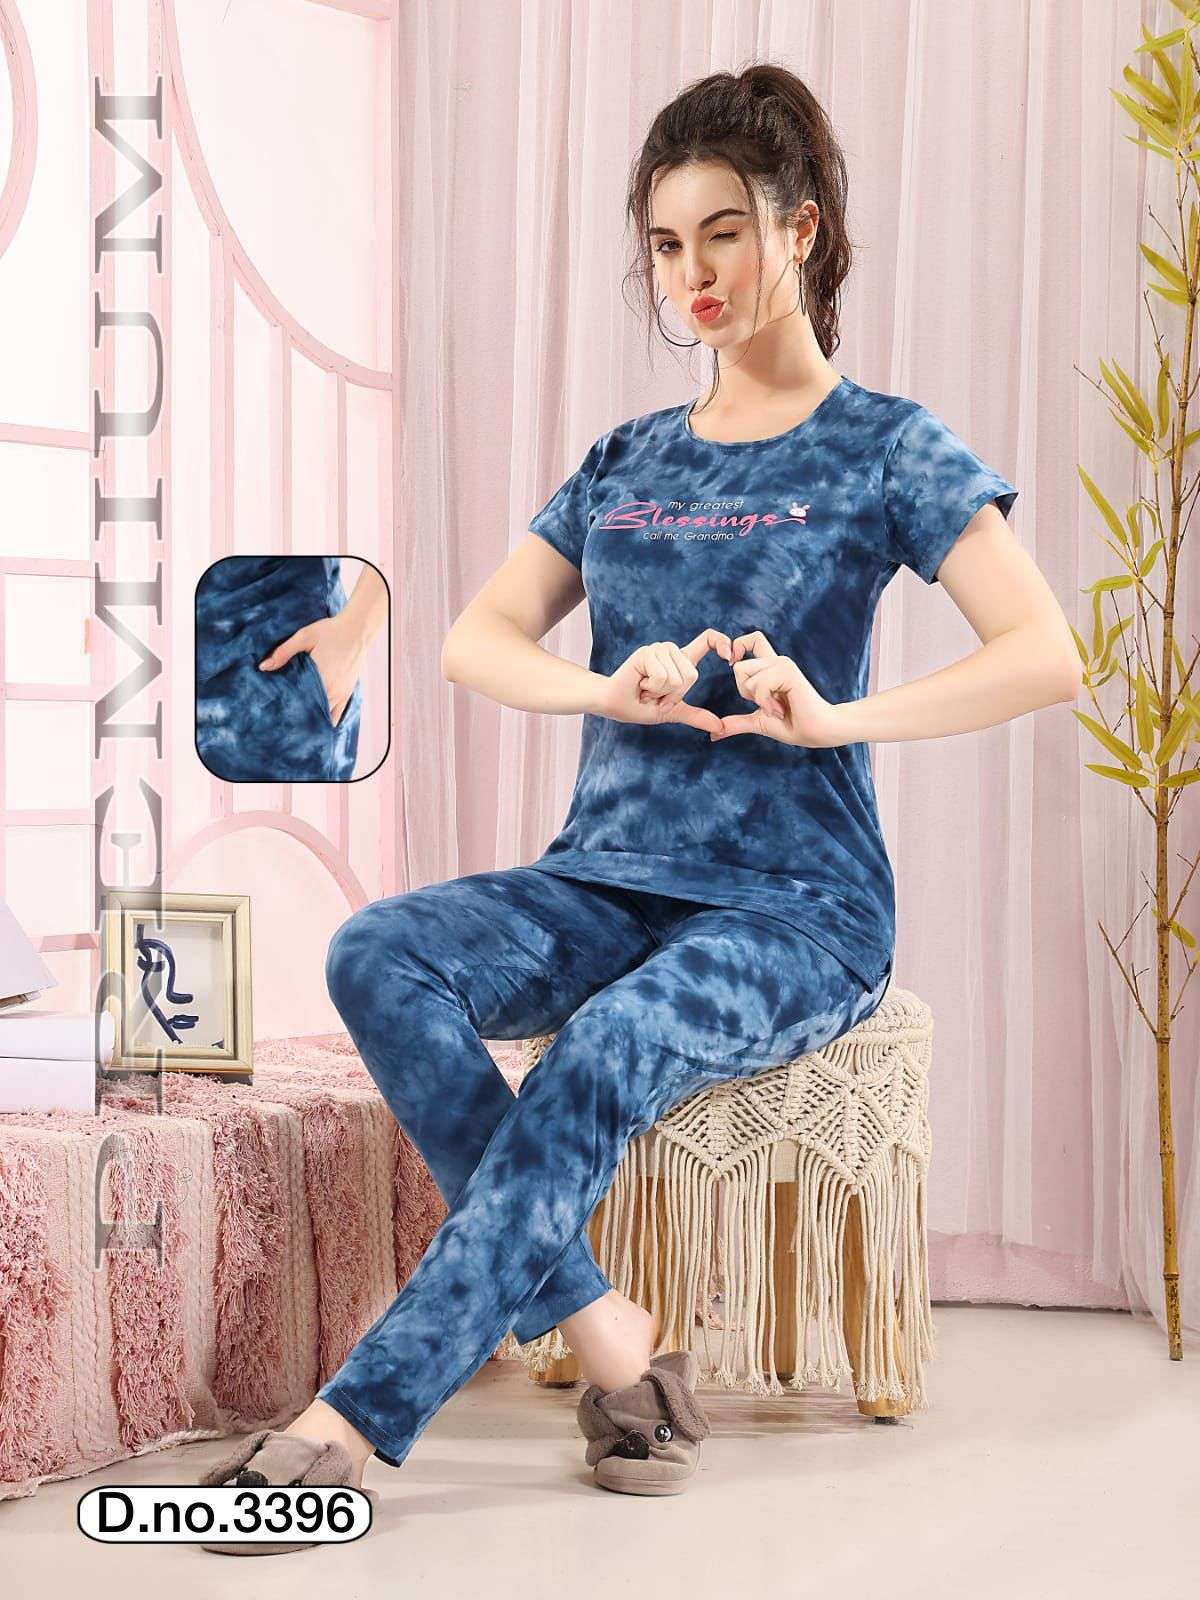 SUMMER SPECIAL NEW VOL.3396 Heavy Shinker Hosiery Cotton Tie Die Night Suits With Pocket CATALOG WHOLESALER BEST RATE